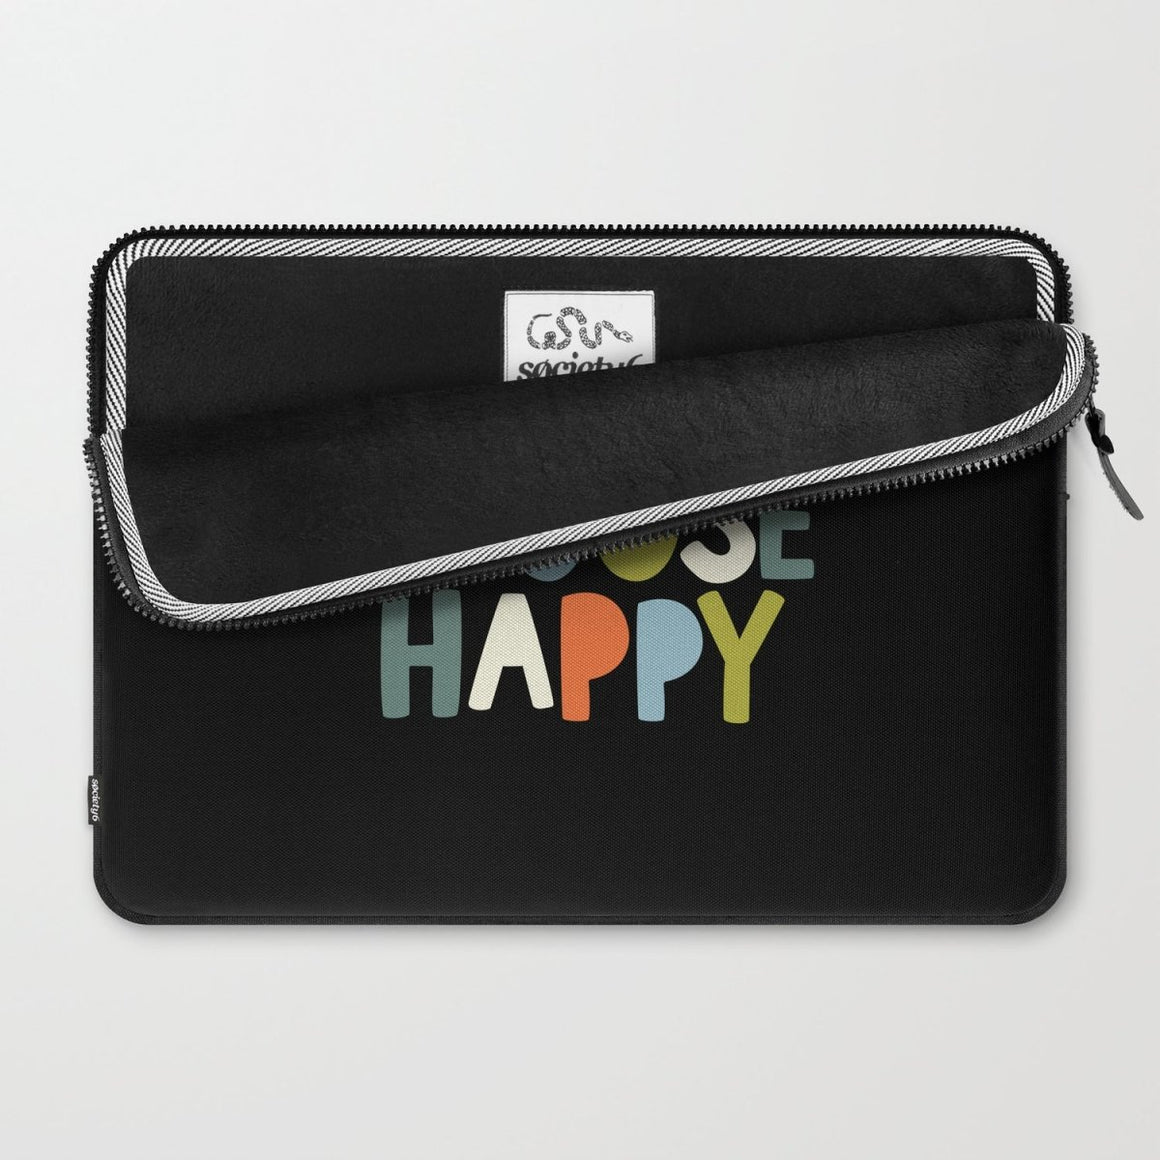 Durable Laptop Sleeve for 13" and 15" Computers - Soft Microfiber Lining-CHOOSE HAPPY - Cork & Leaf15"